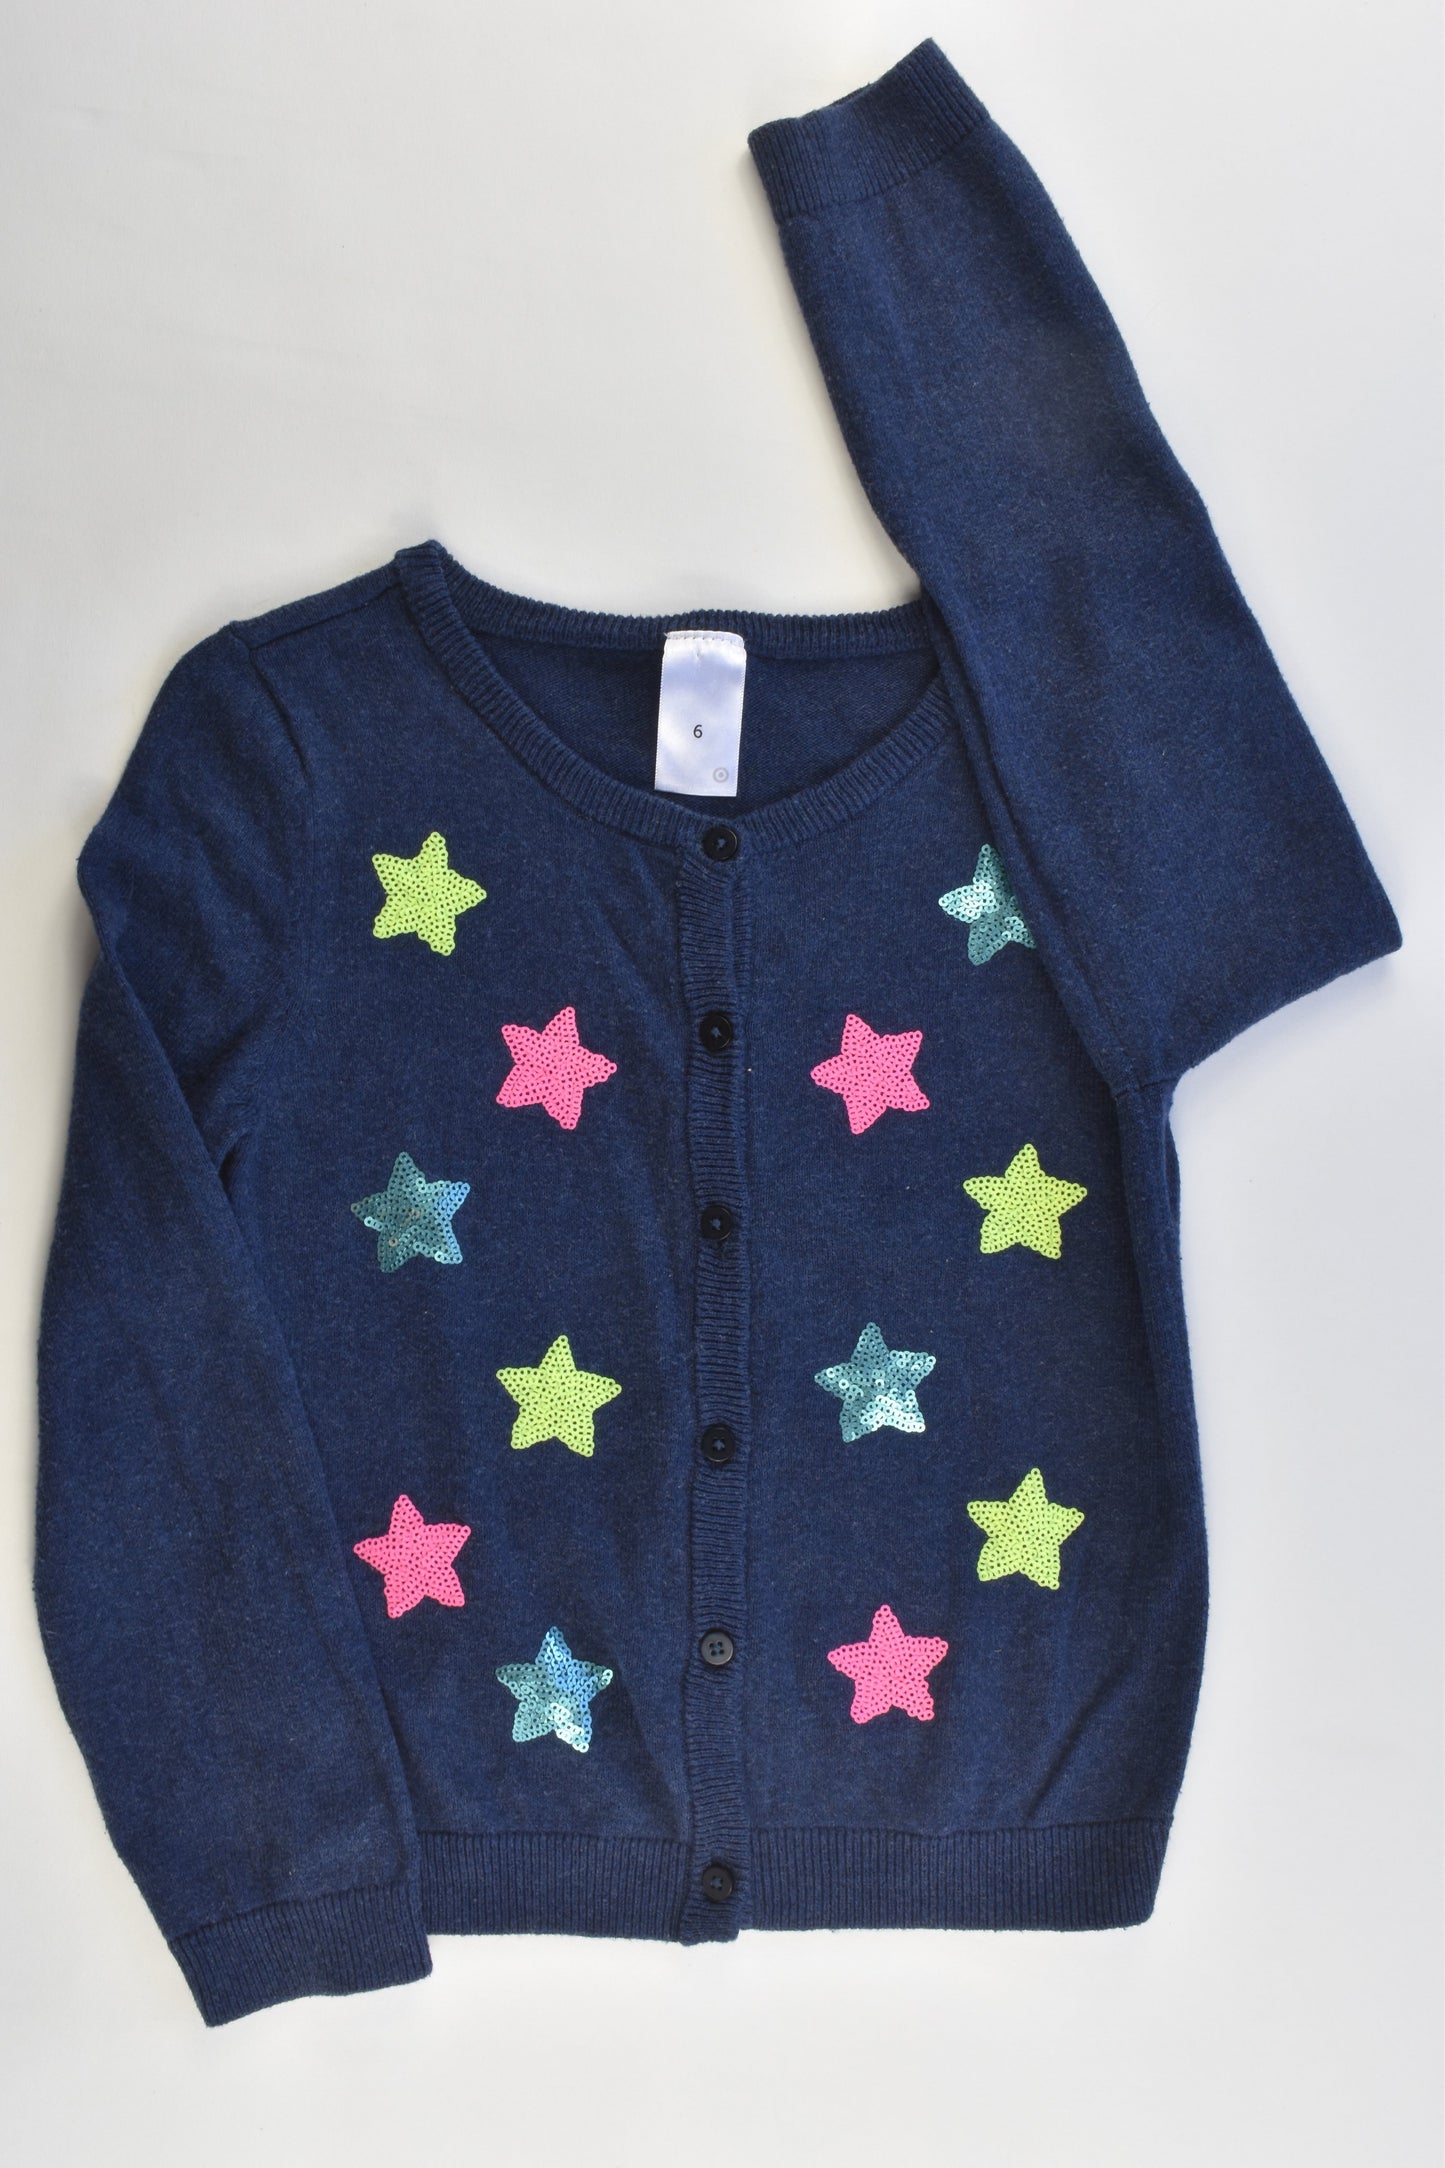 Target Size 6 Sequin Stars Knitted Cardigan